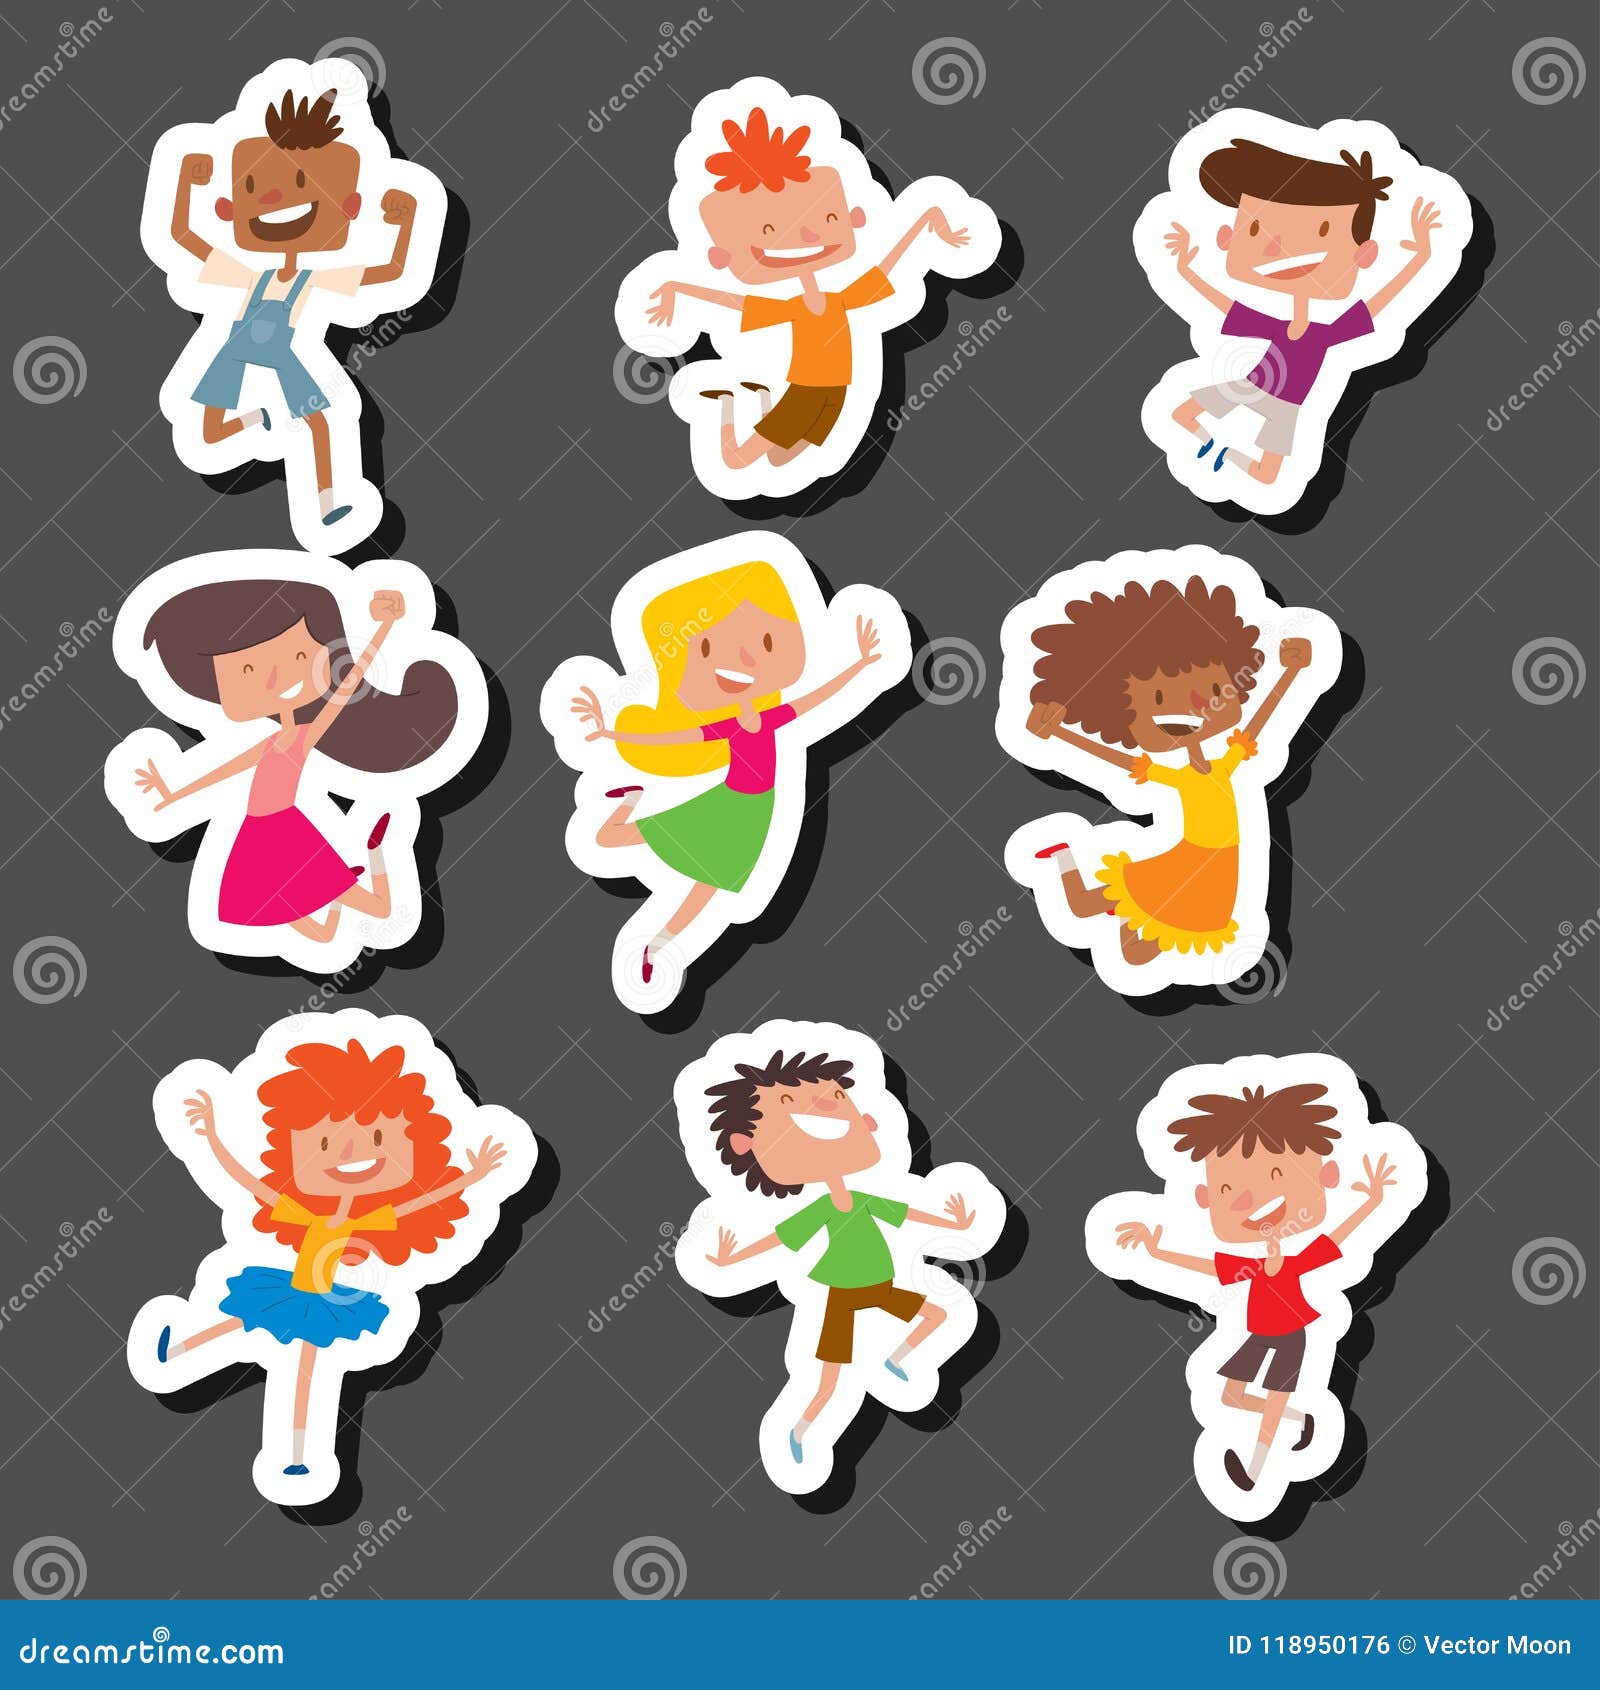 Group of cheerful children in a jump cartoon Vector Image